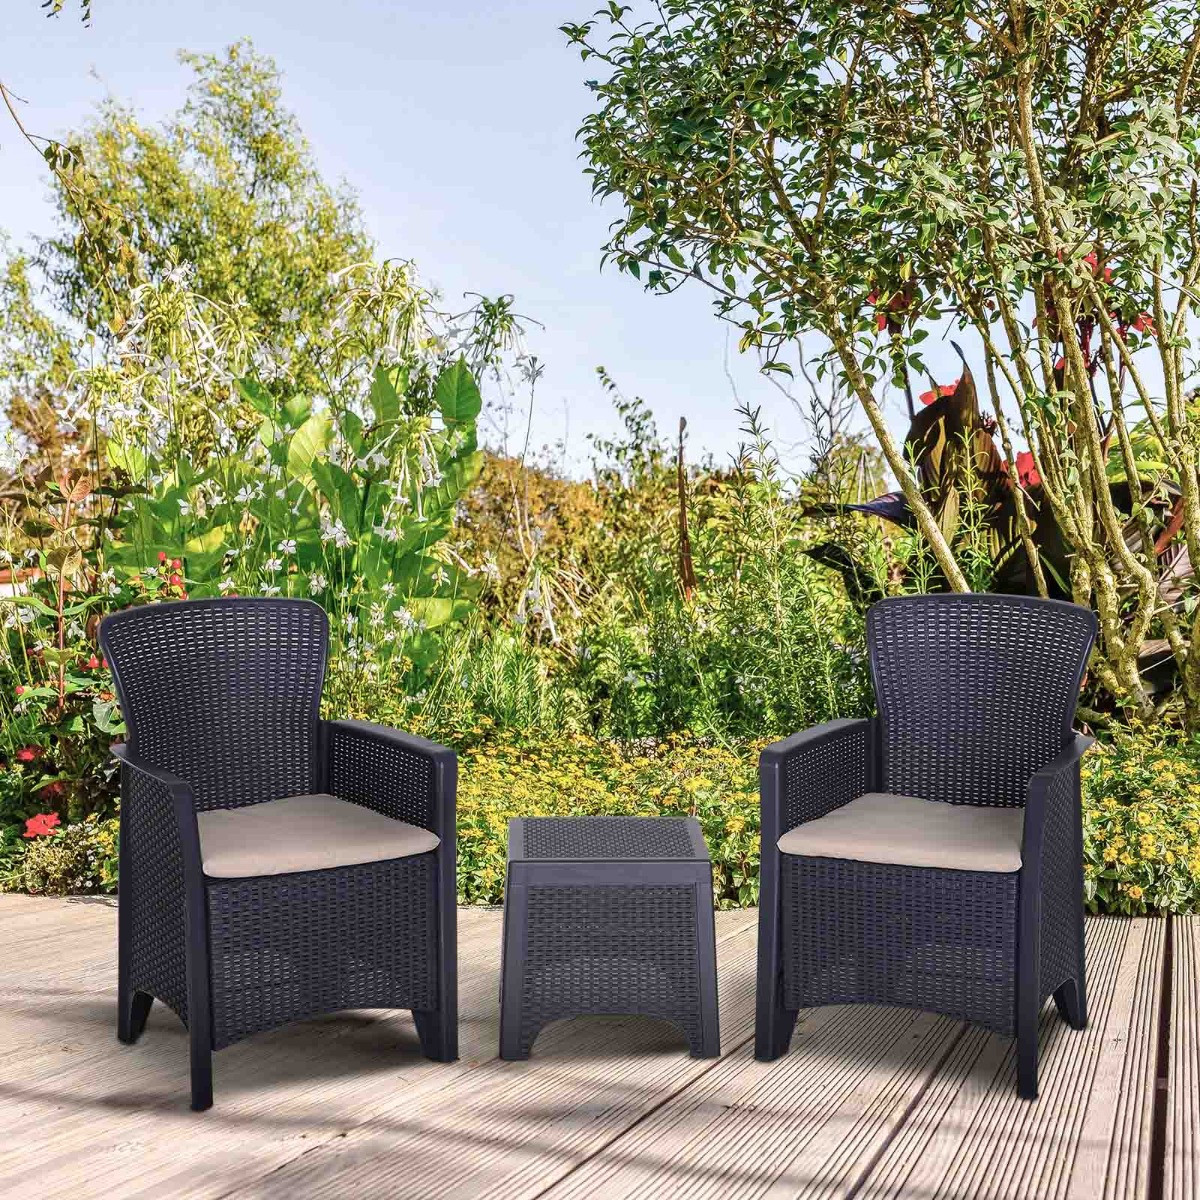 Outsunny Rattan Effect Garden Bistro Set With Coffee Table, 3 Piece - Graphite>